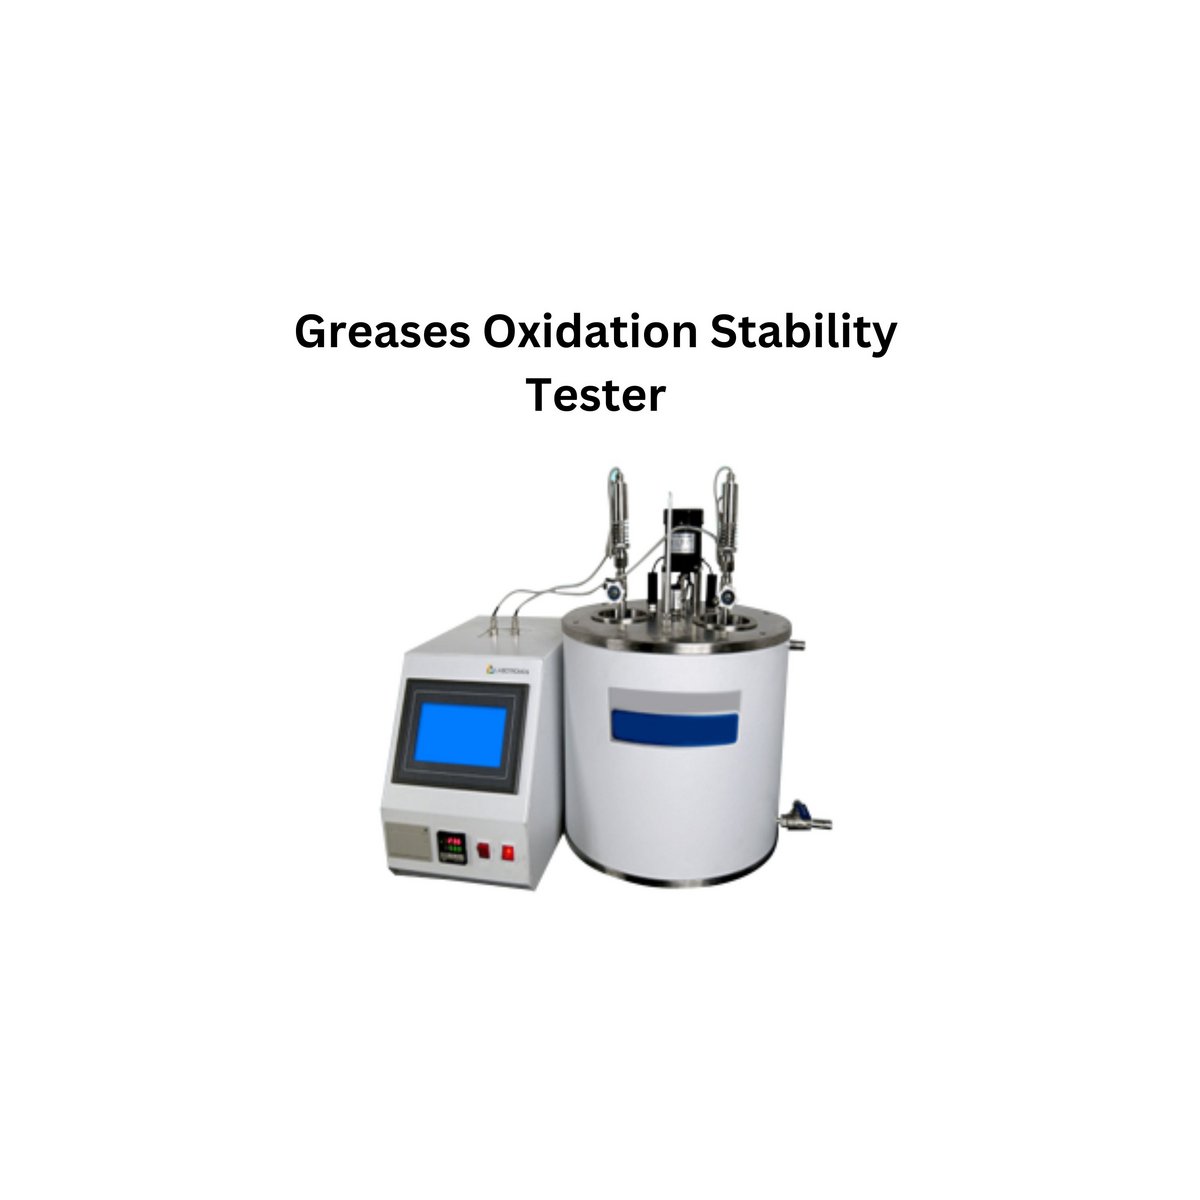 Greases Oxidation Stability Tester.jpg